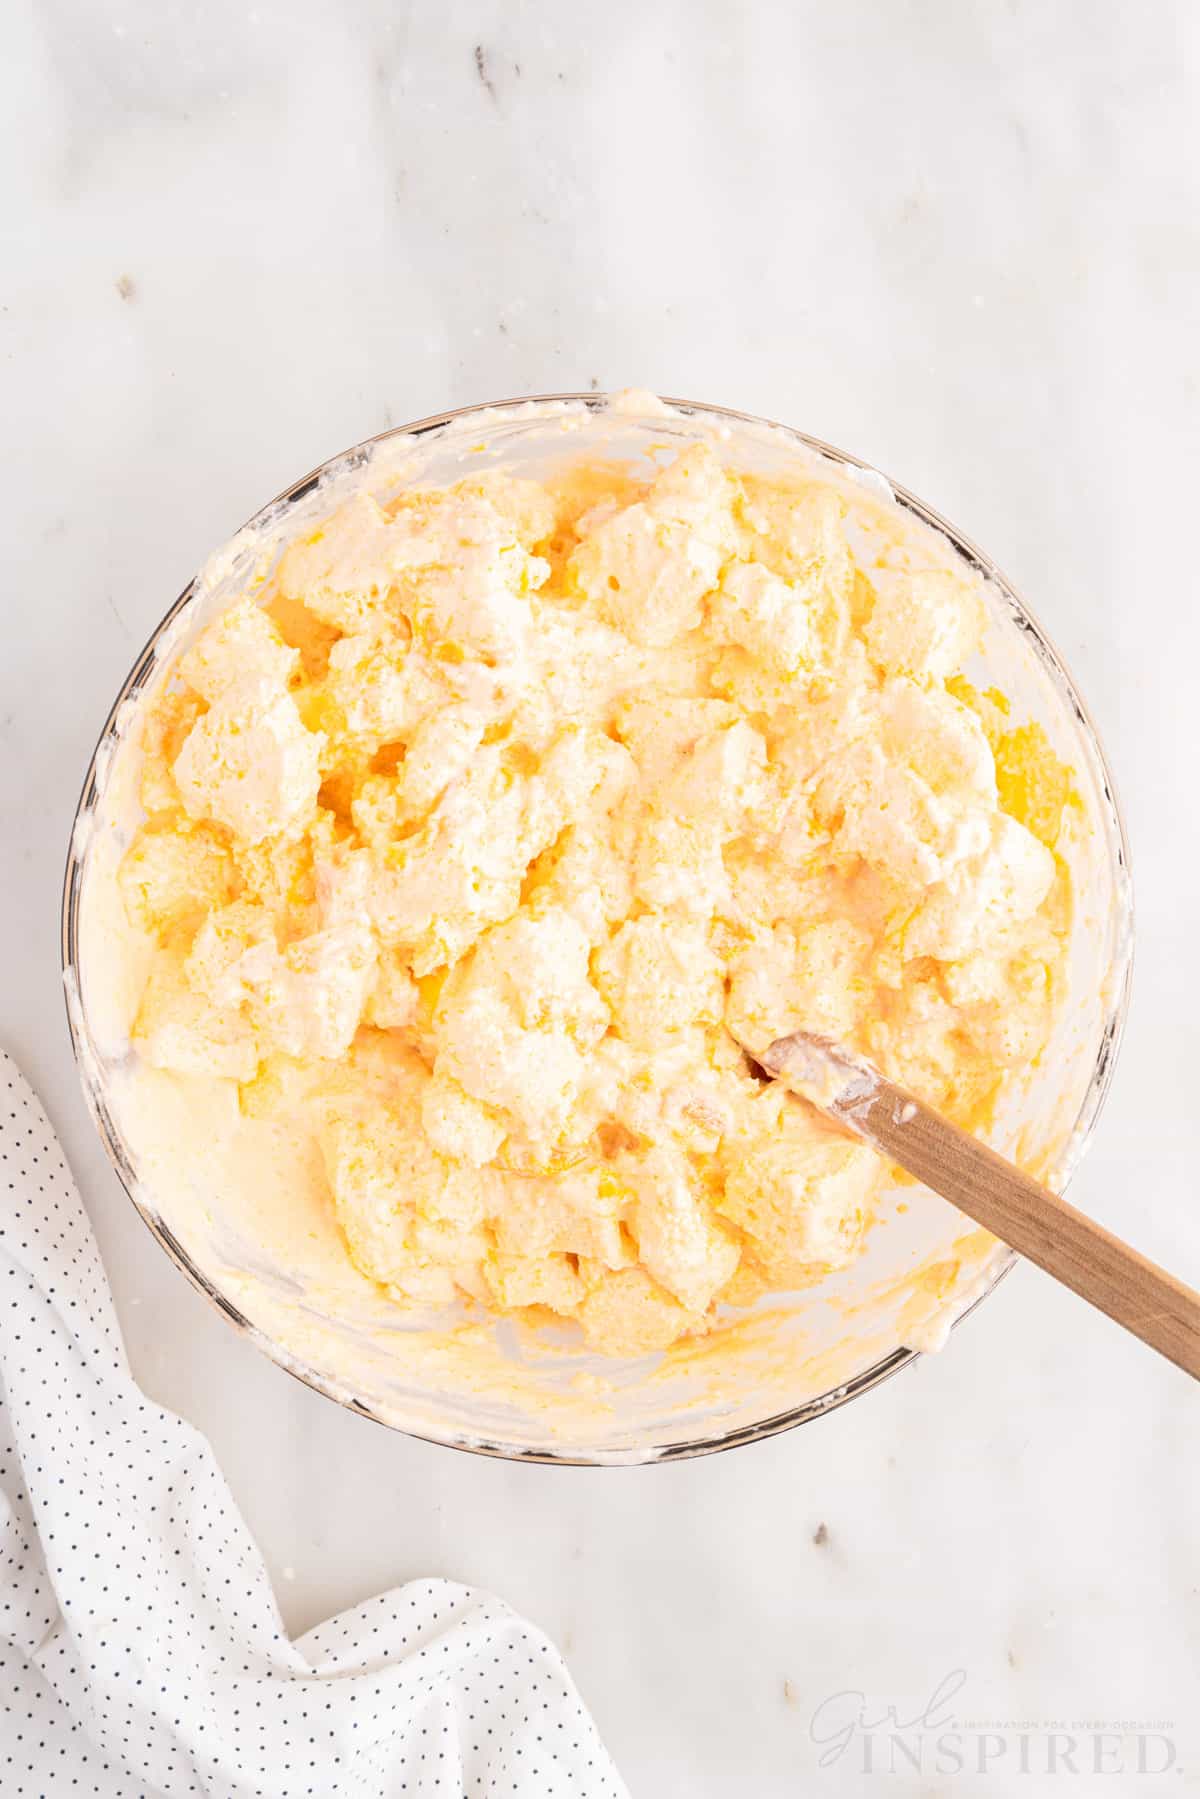 Apricot Delight mixture stirred together in a mixing bowl with a spatula.